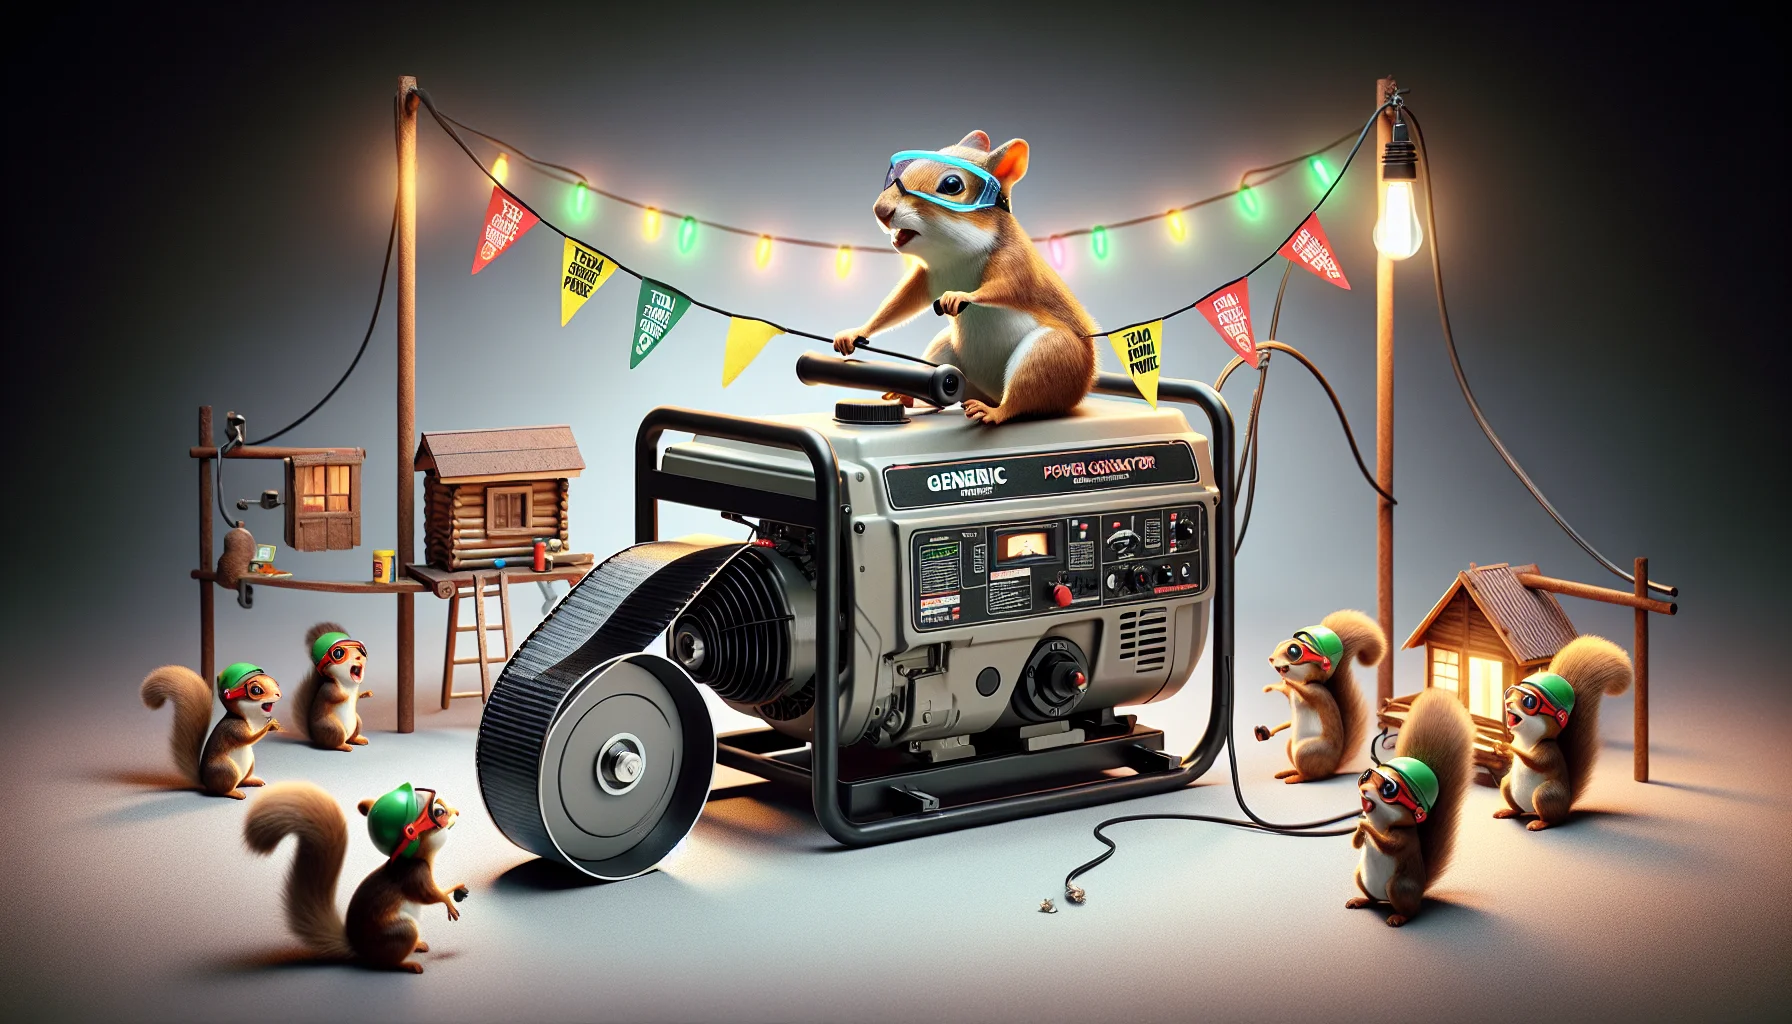 Create a humorous and realistic image showcasing a generic power generator that closely resembles the robust design of certain well-known Japanese models from the 1990s. In the comical scenario, an anthropomorphic squirrel wearing safety goggles is attempting to pedal on a circular treadmill attached to the generator, which causes a string of colorful lights draped over a miniature cabin to light up. Another group of squirrels are onlookers, cheering and holding 'Team Squirrel Power' pennants as they marvel at the makeshift electricity production.